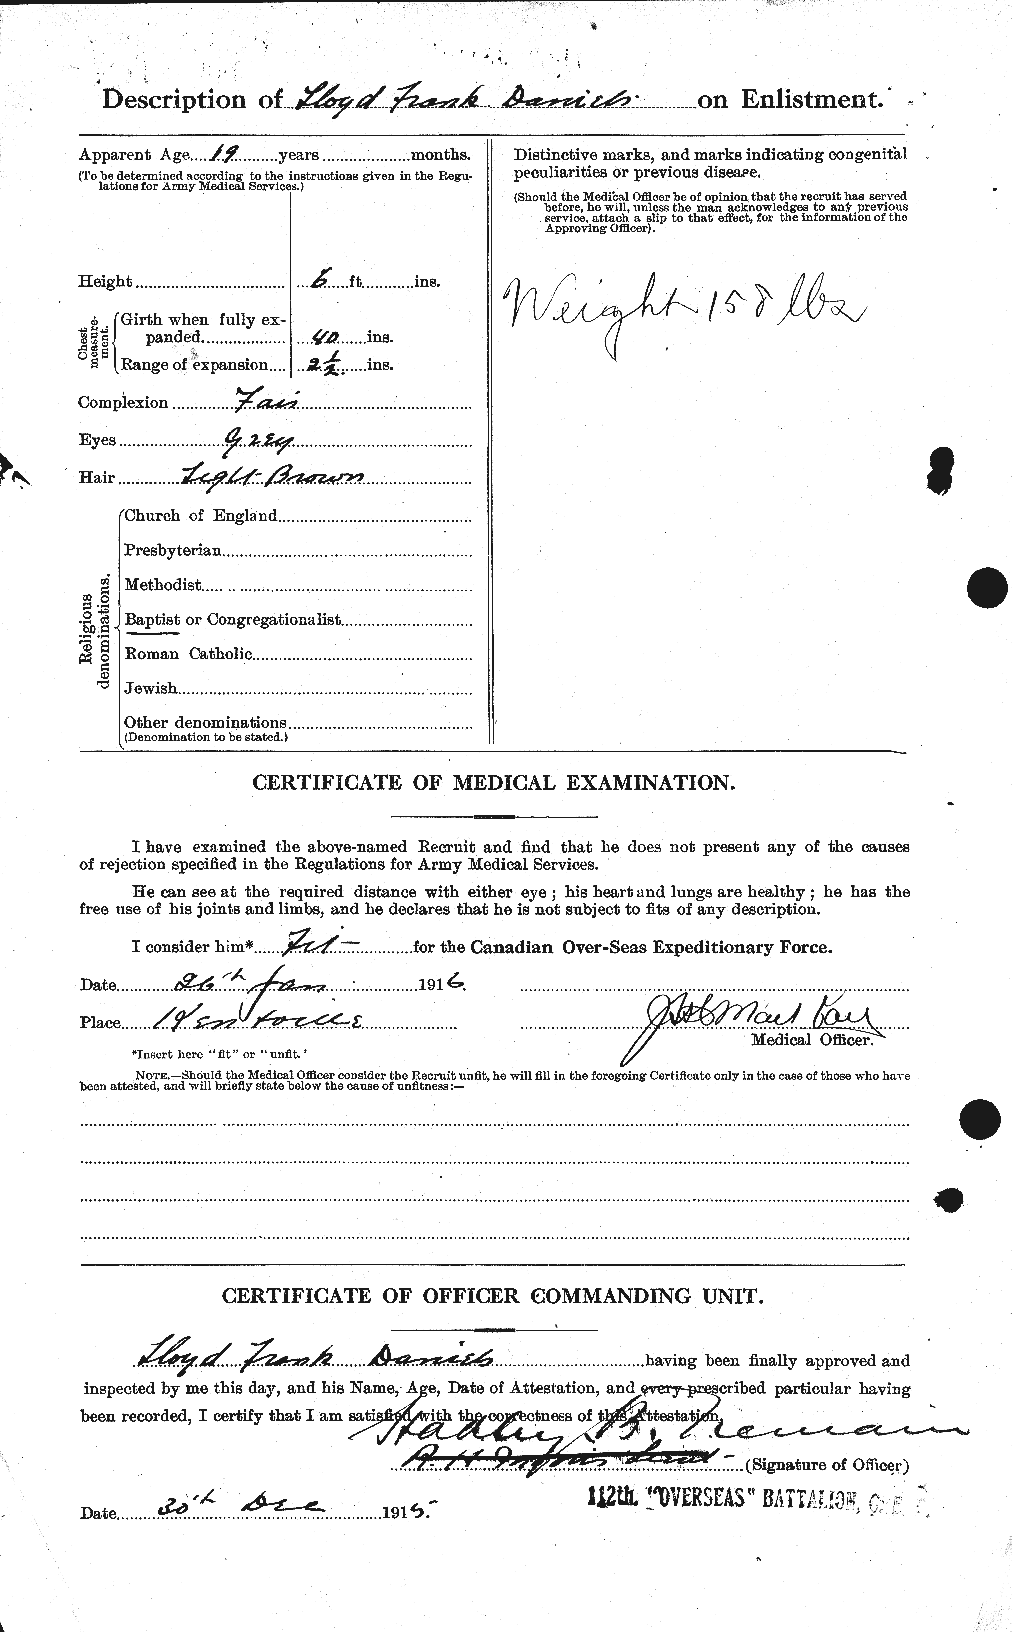 Personnel Records of the First World War - CEF 279652b